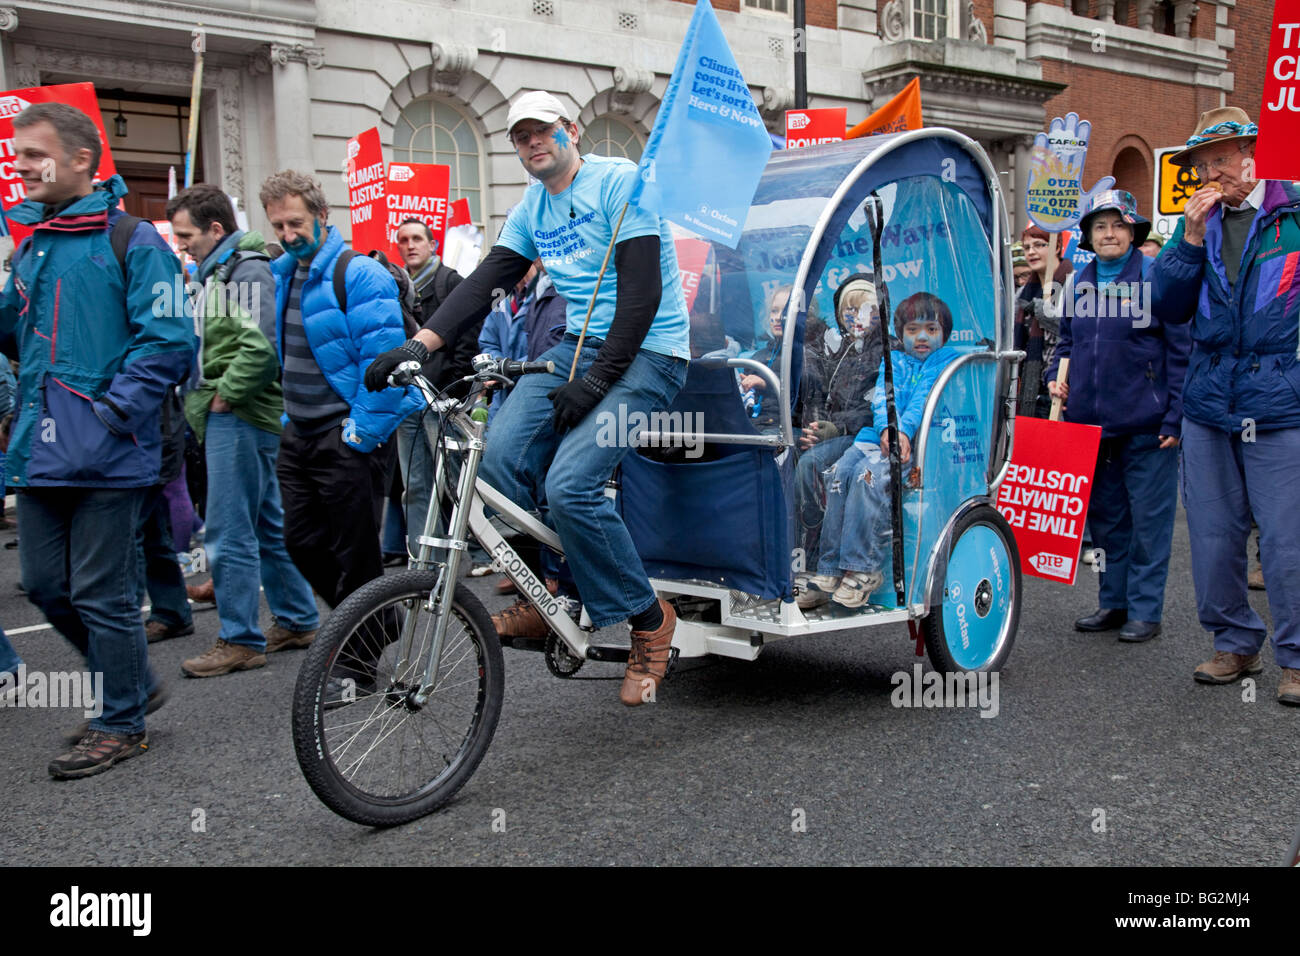 Blue OXFAM trishaw tricycle taxi The Wave Climate Change March London December 5 2009 Stock Photo